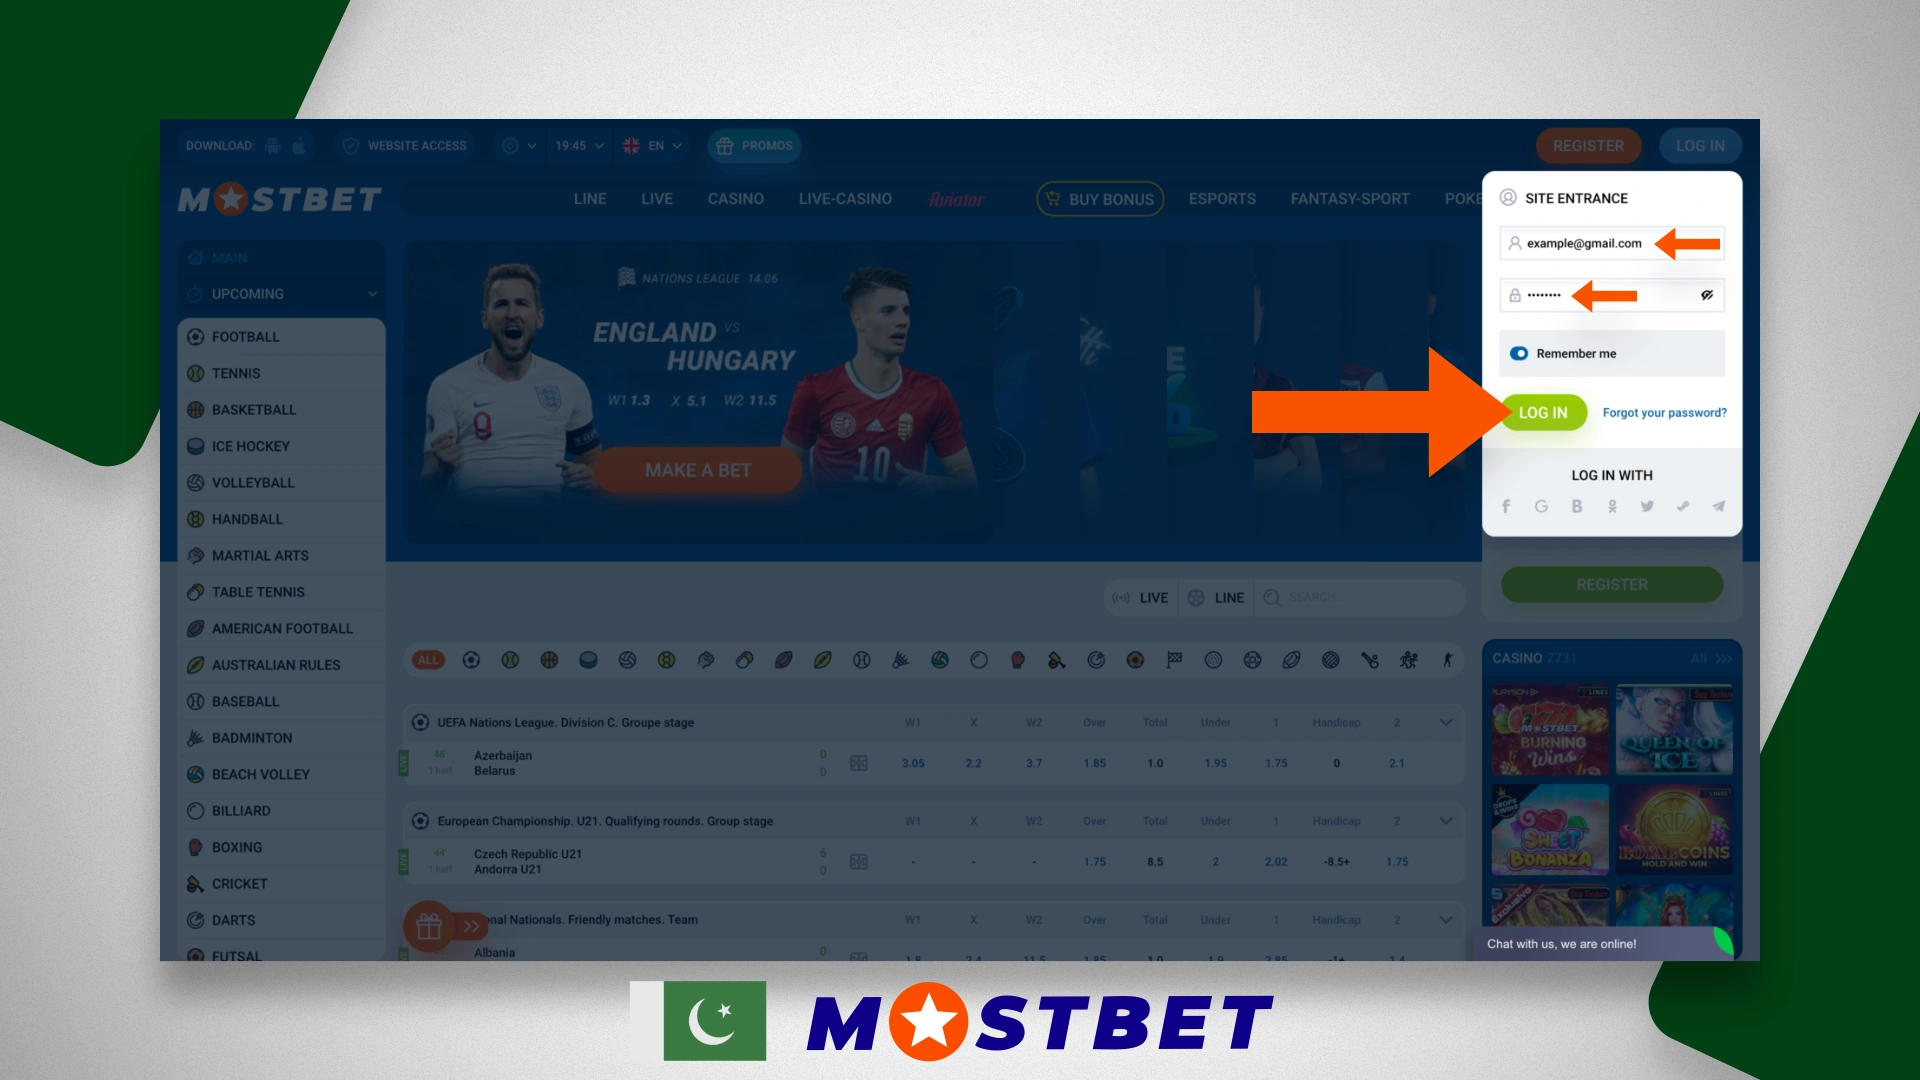 Authorization of the user on the Mostbet Pakistan website